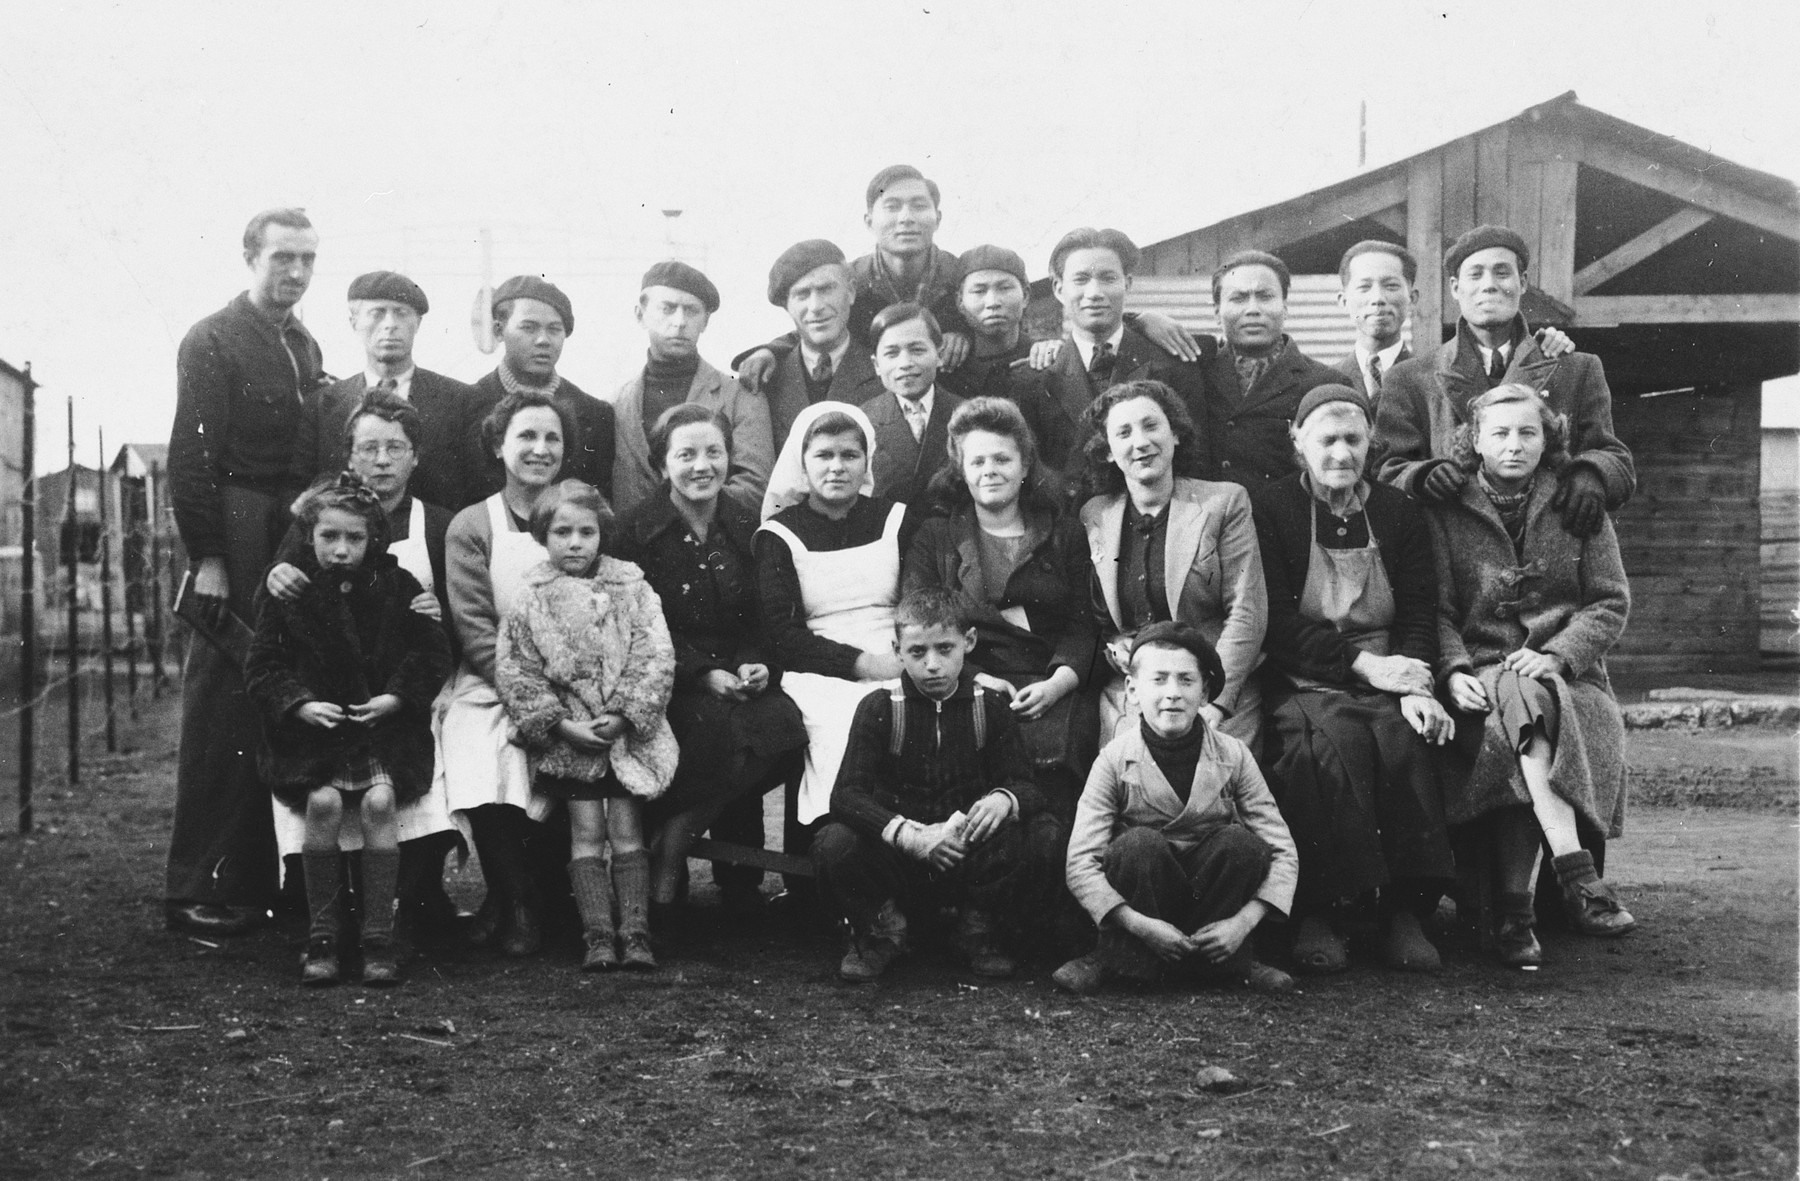 Portrait of Jewish internees in a camp in Haute Garonne.

Among those pictured is Janka Penner (seated second from the left).